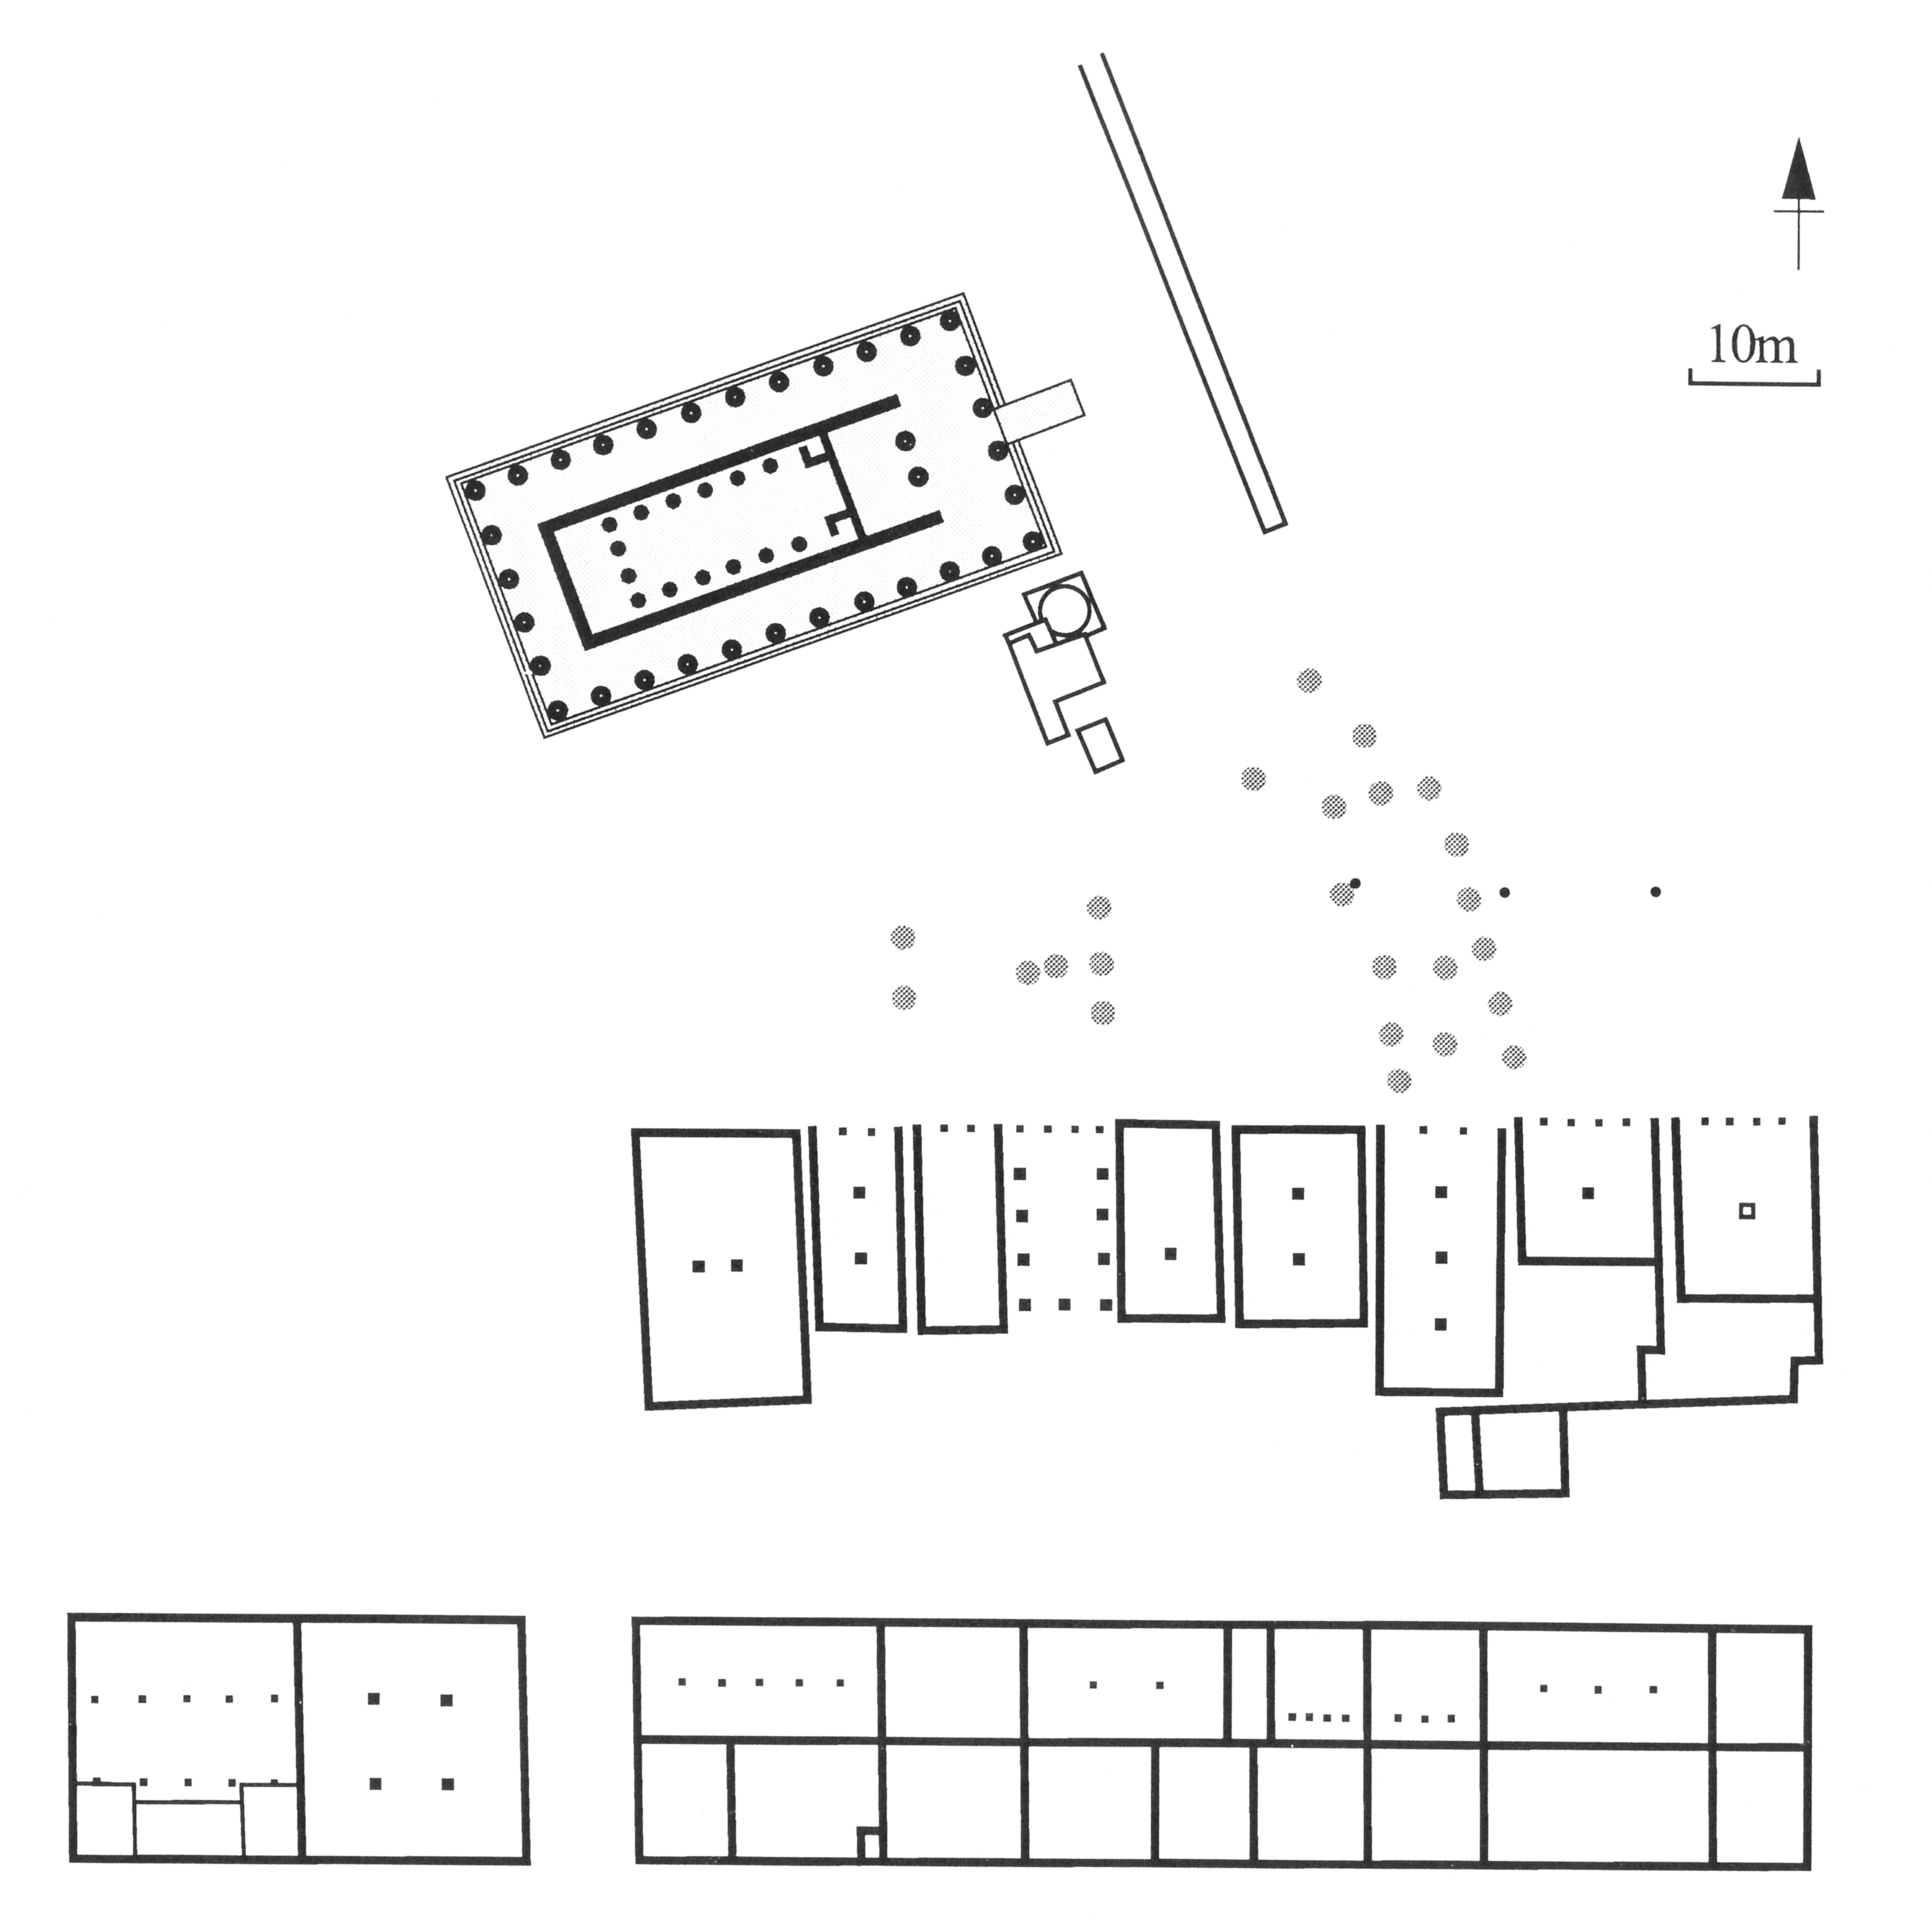 plan of the sanctuary with rock-cut pits for trees (grey circles) between the temple and other sanctuary buildings.